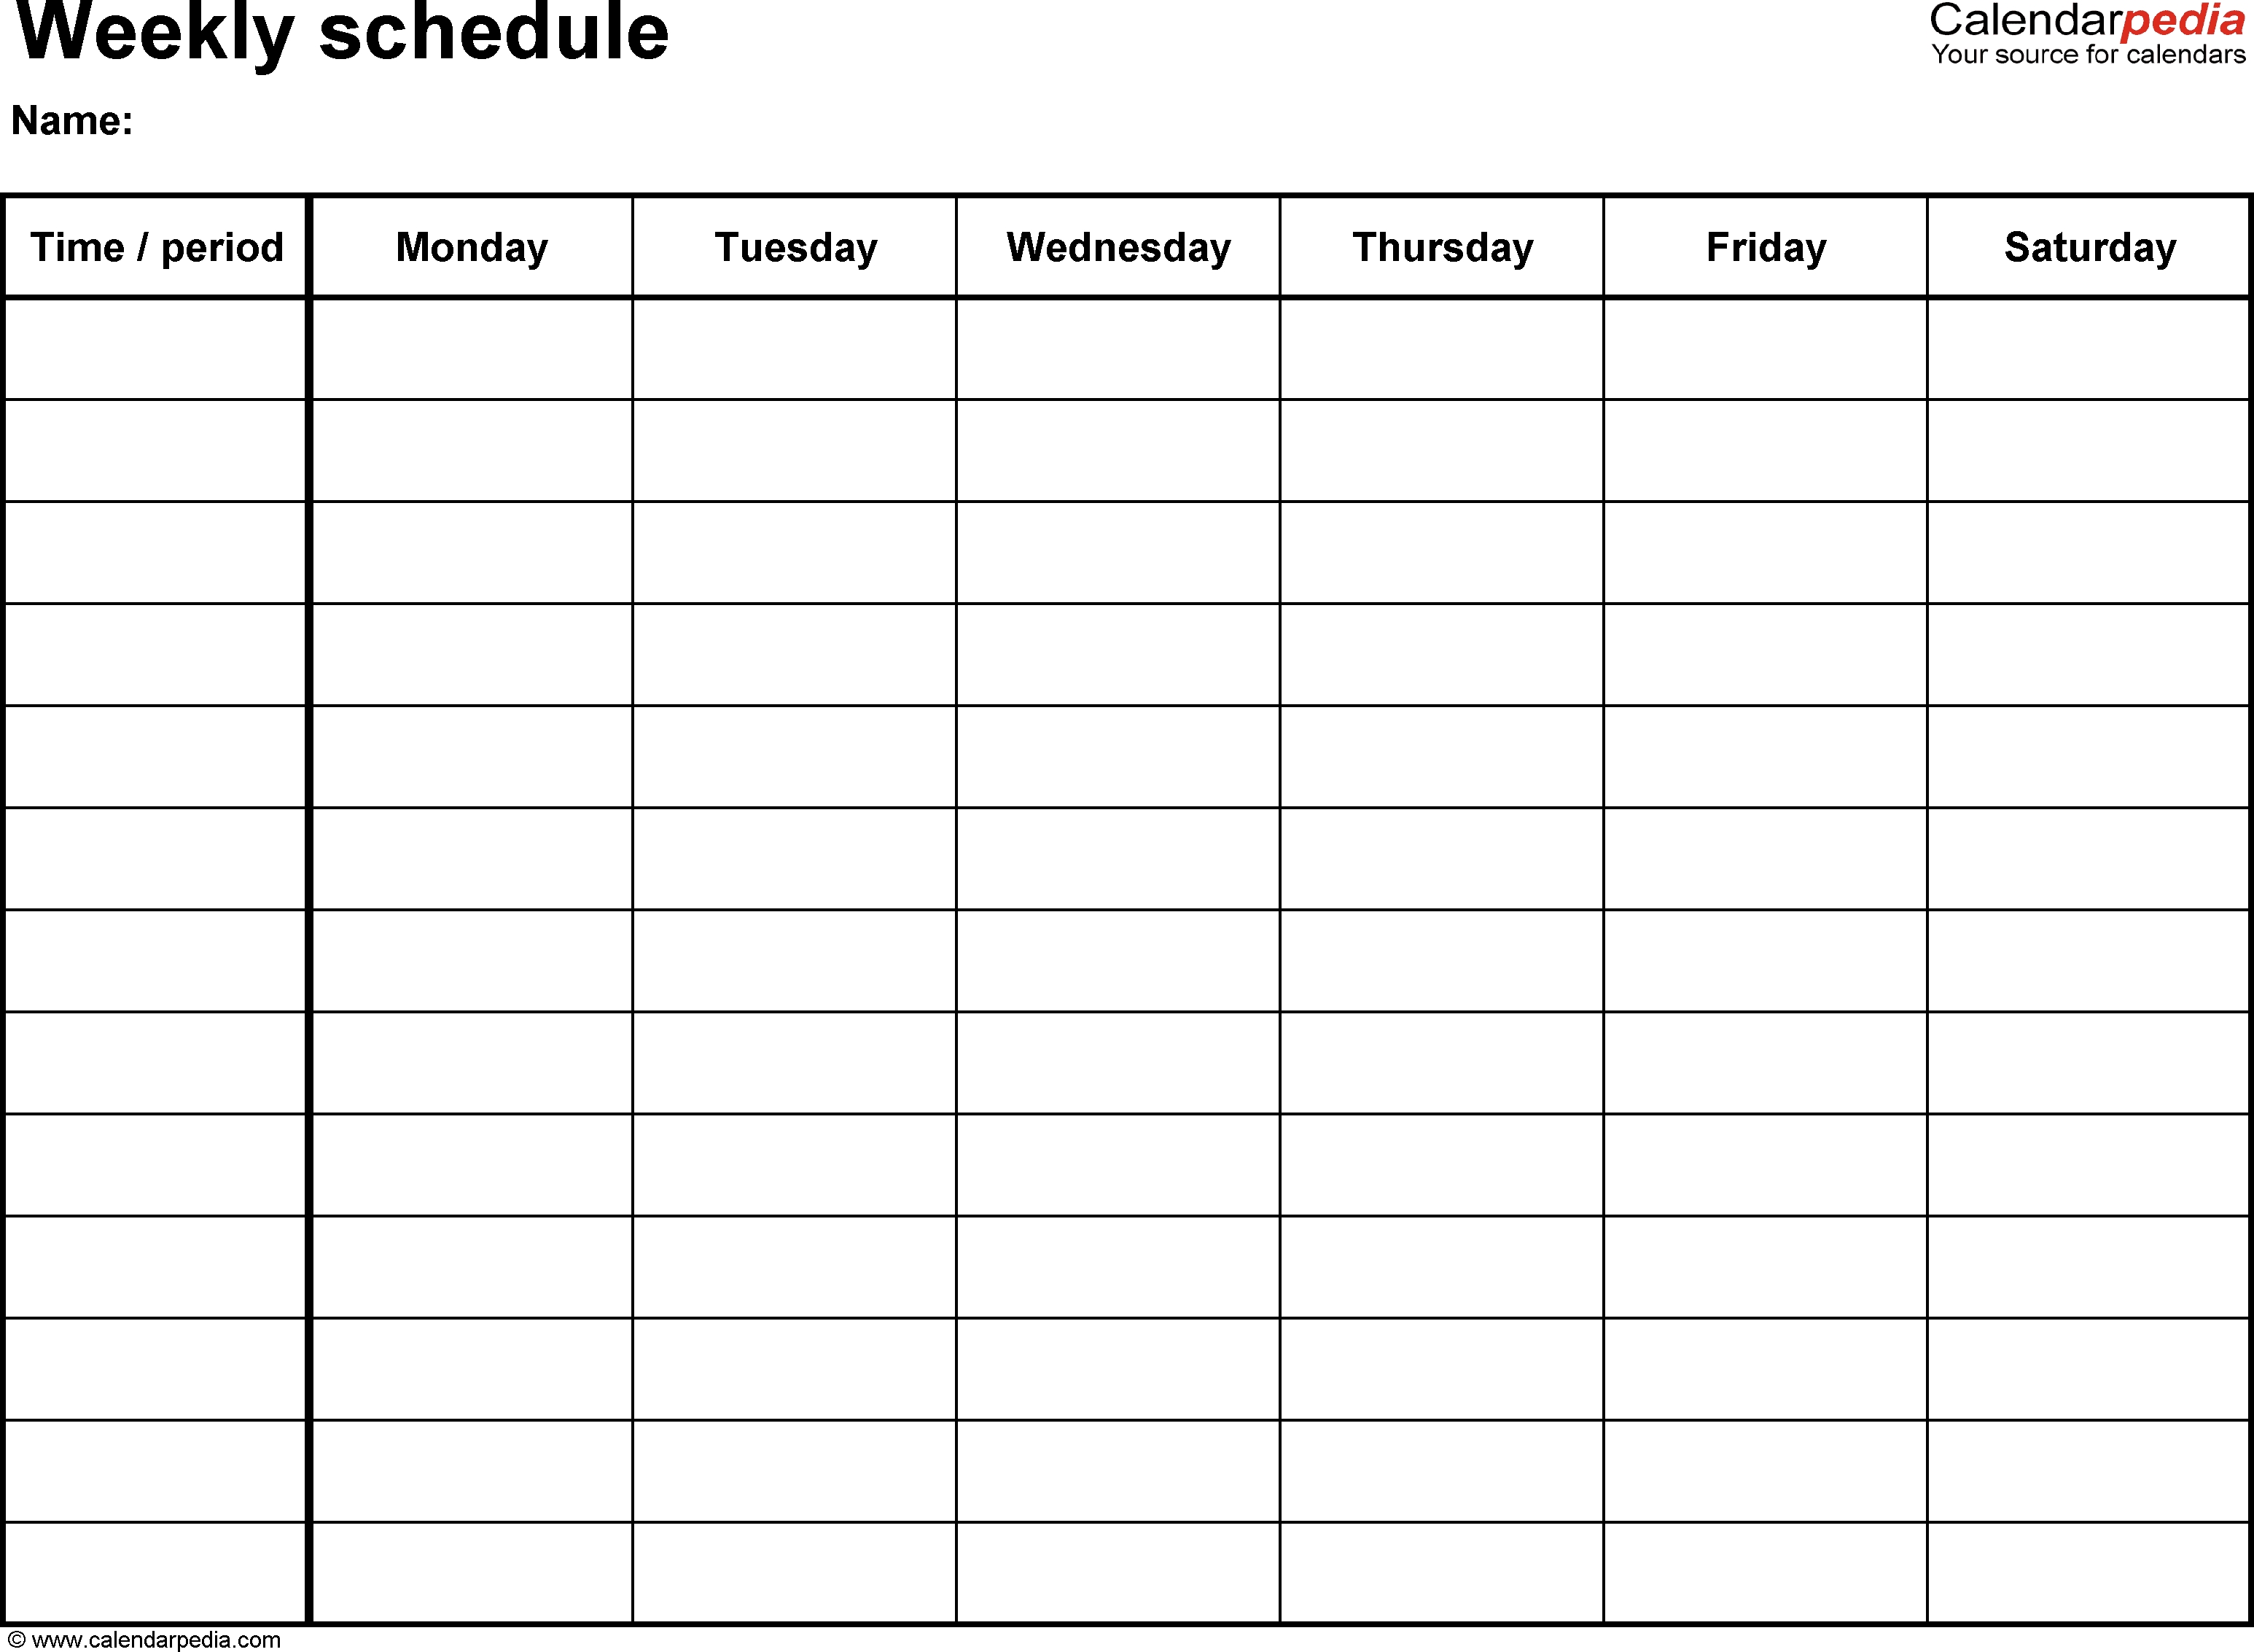 Free Weekly Schedule Templates For Word - 18 Templates  Blank Weekly Calendar Template Free